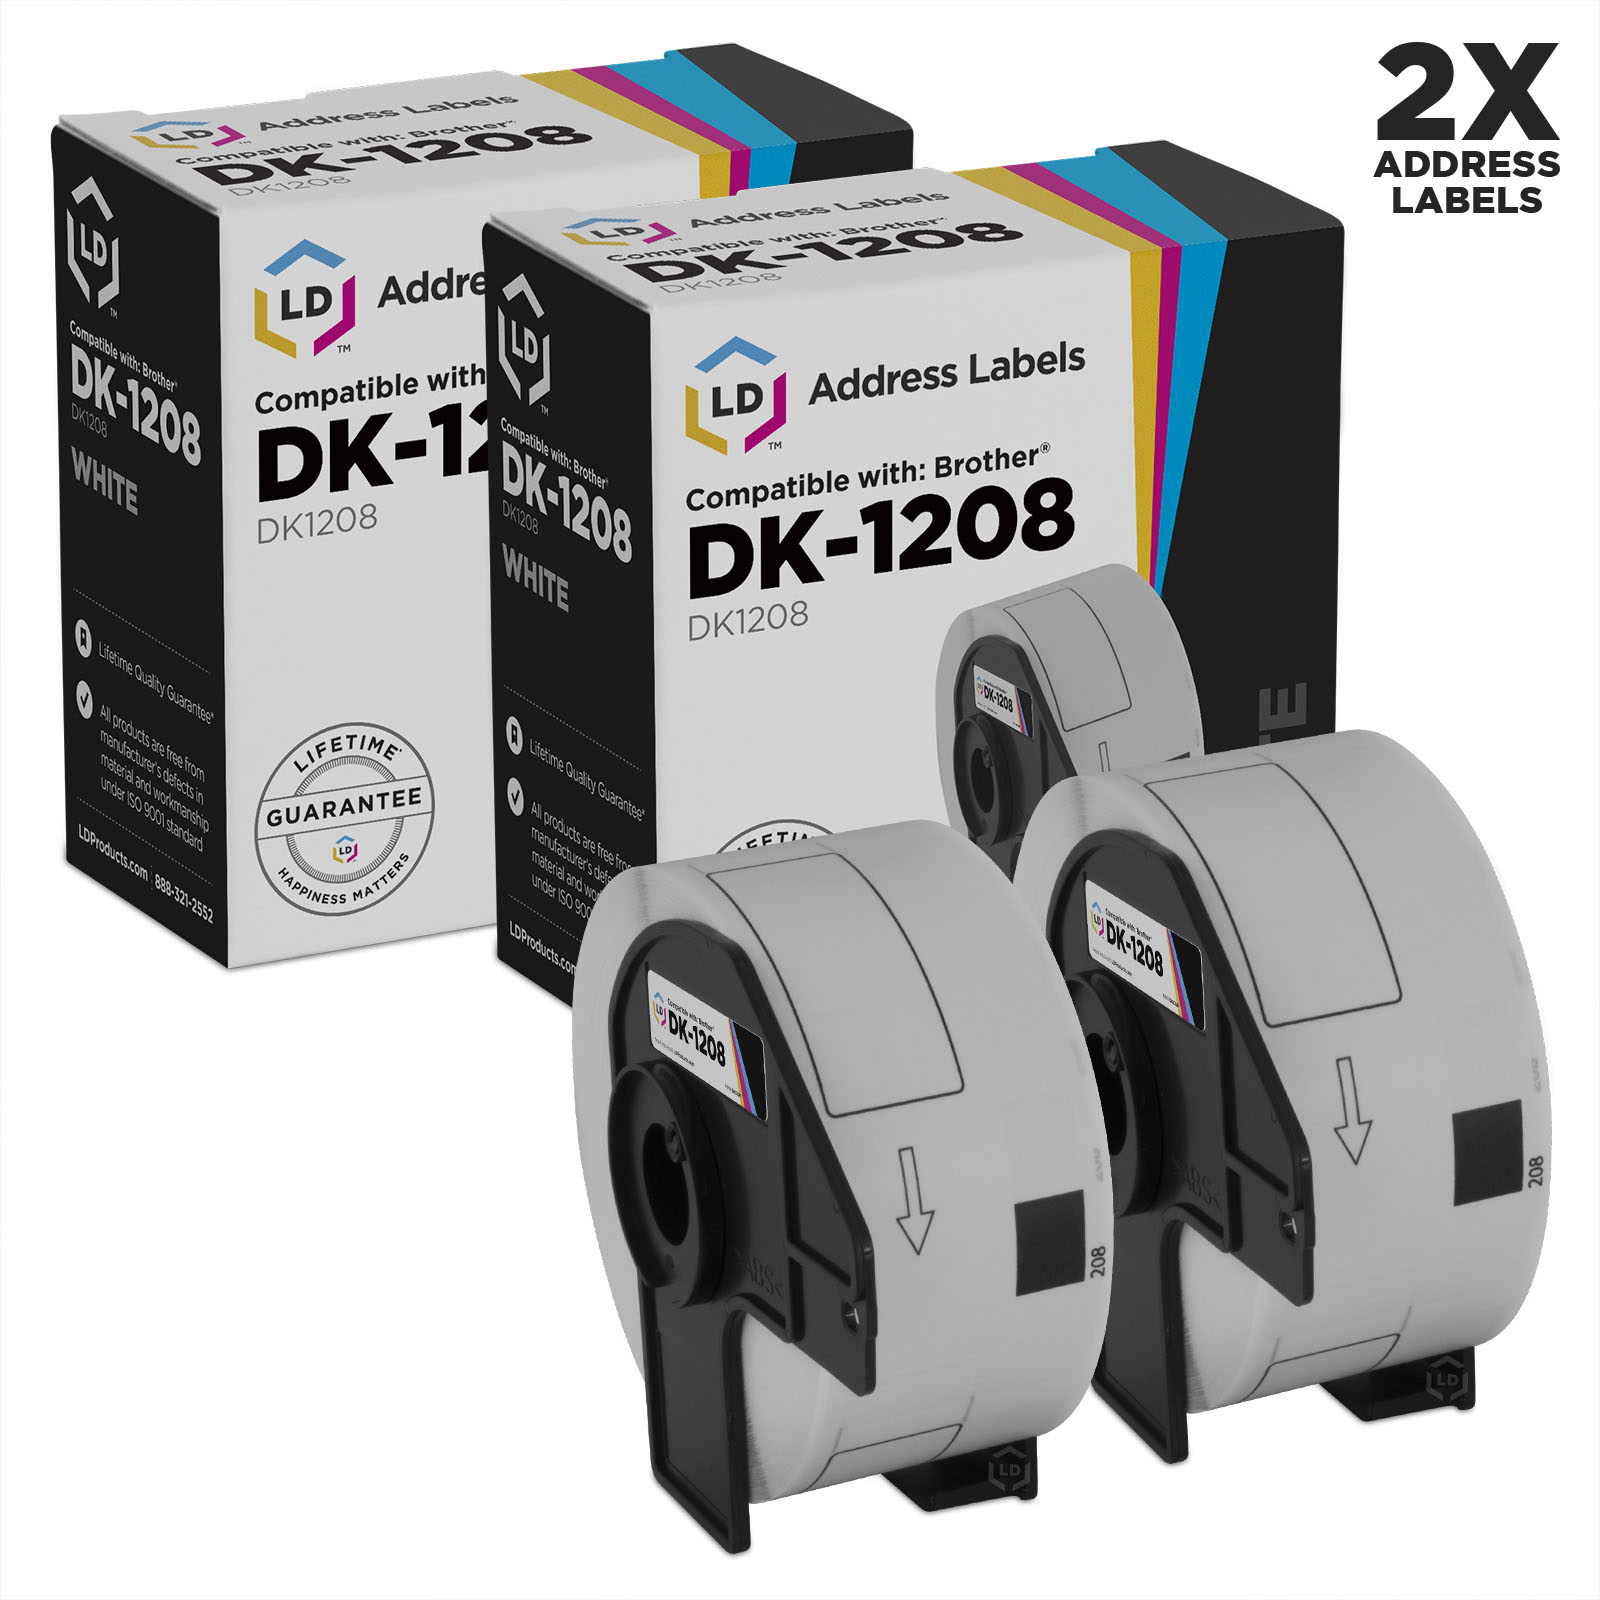 LD Compatible Address Label Replacement for DK-1208 1.4 in x 3.5 in (400 Labels, 2-Pack) - image 1 of 1